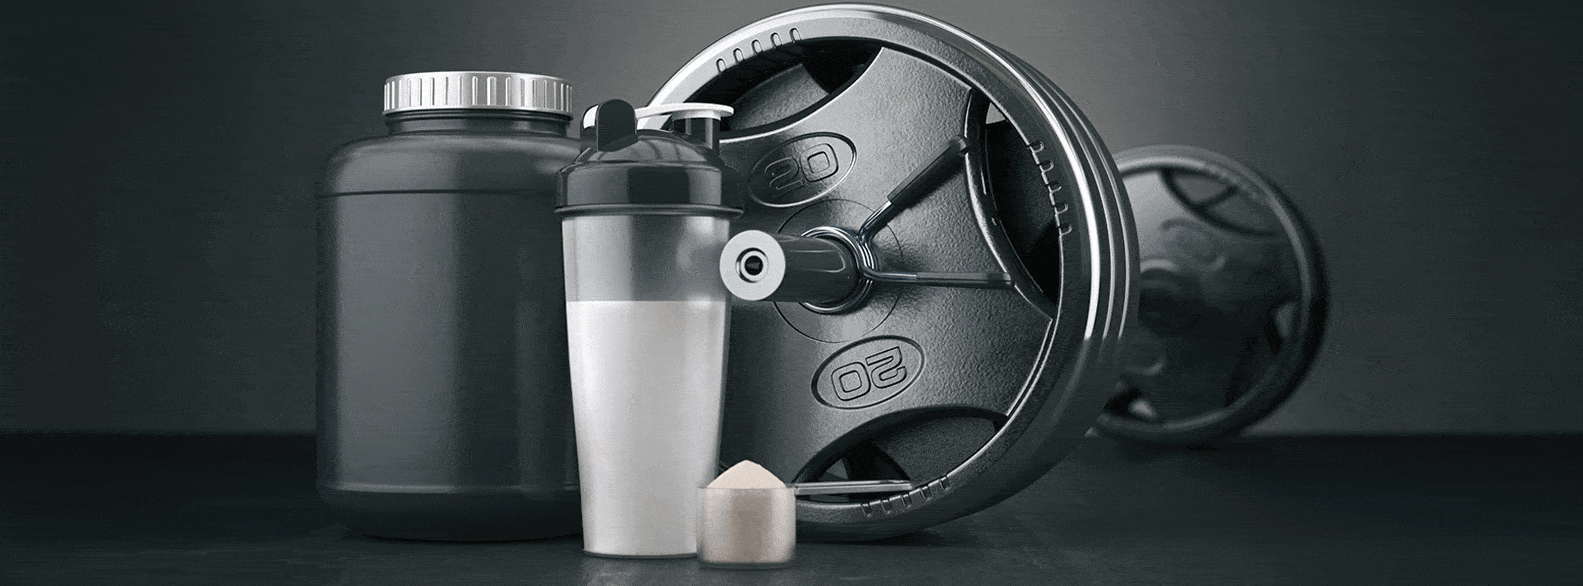 creatine alternatives that you haven't heard of